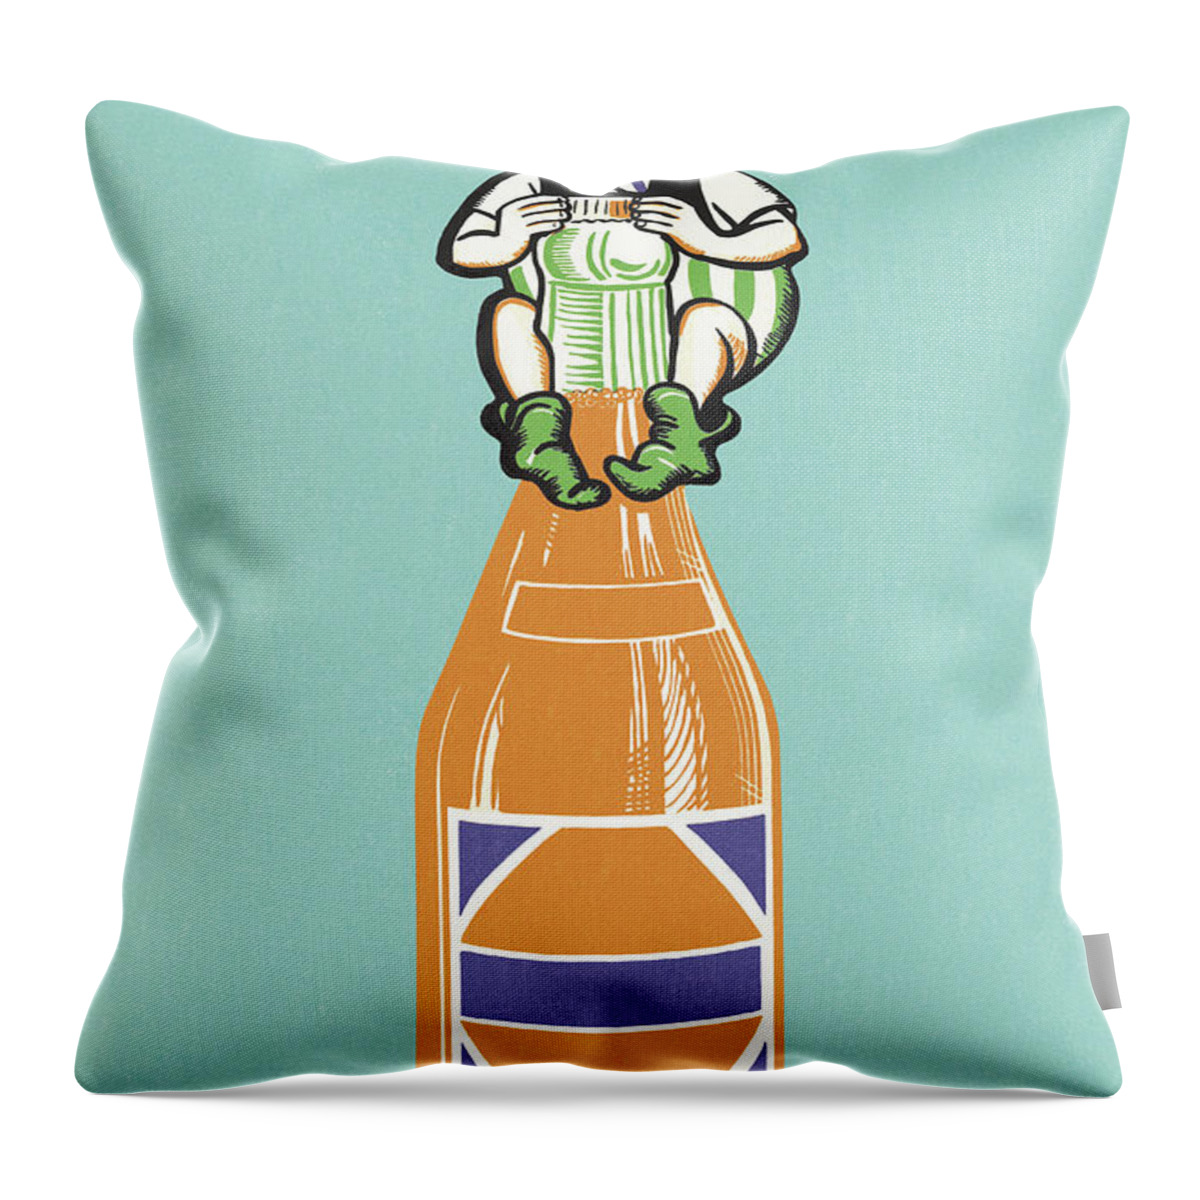 Beverage Throw Pillow featuring the drawing Soda Bottle With Elf by CSA Images